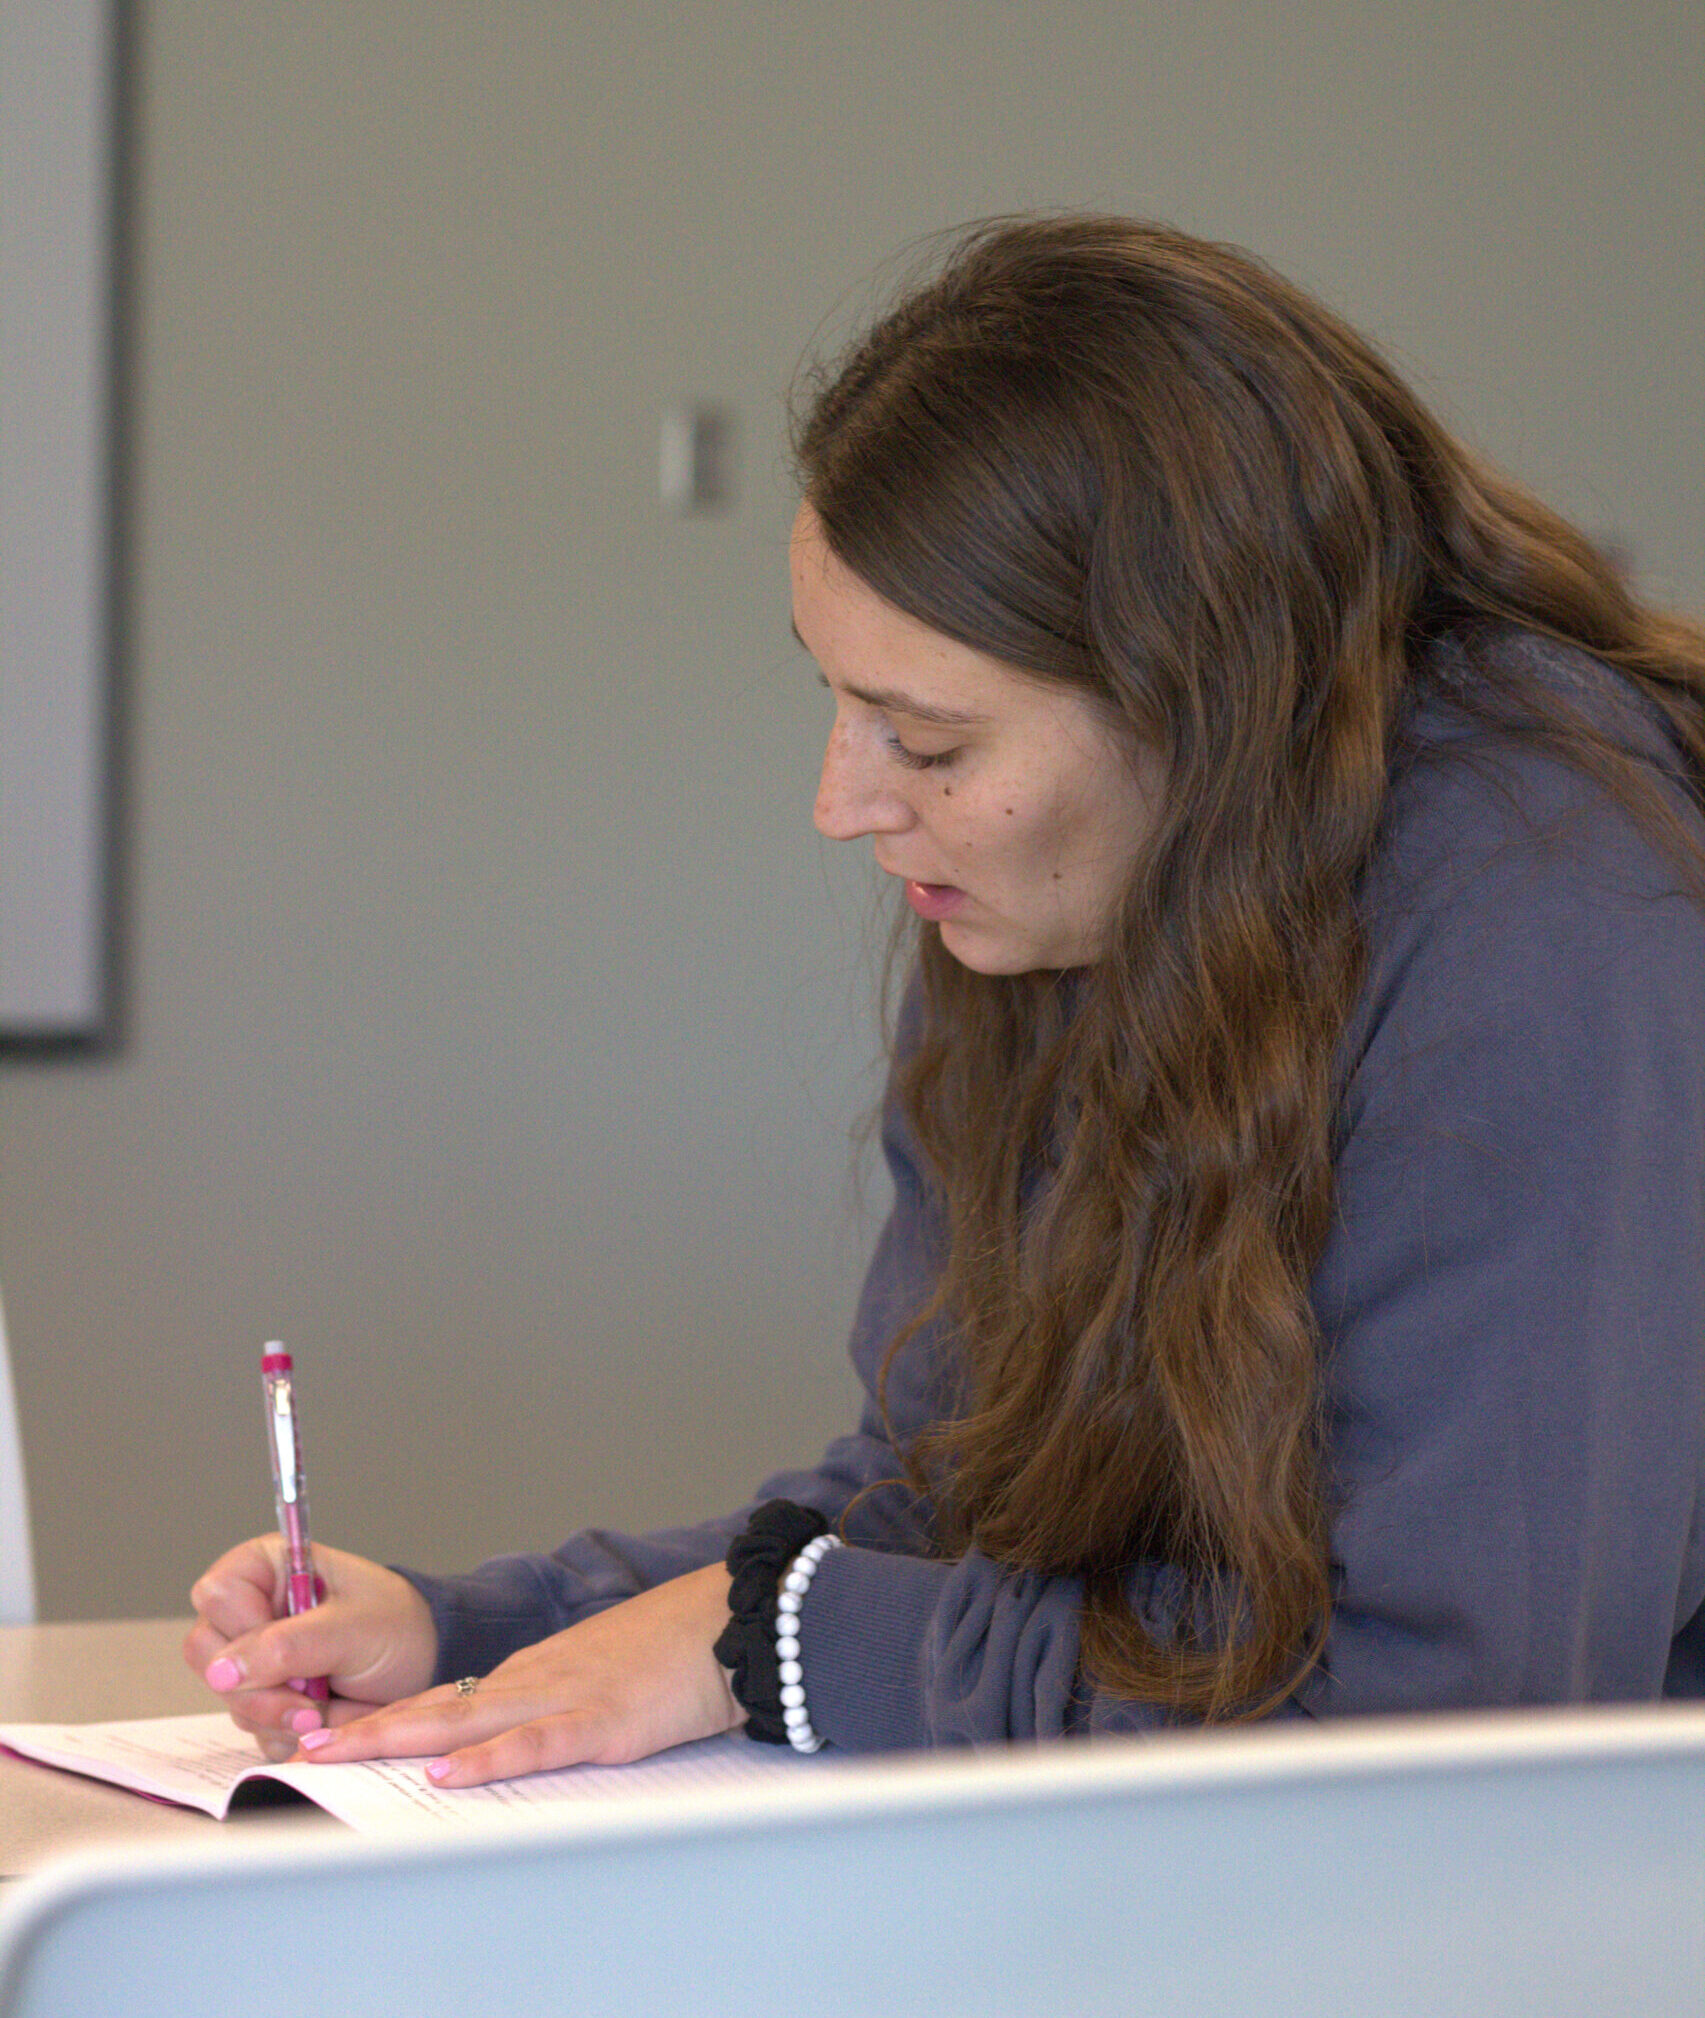 Faculty member writes notes from a workshop